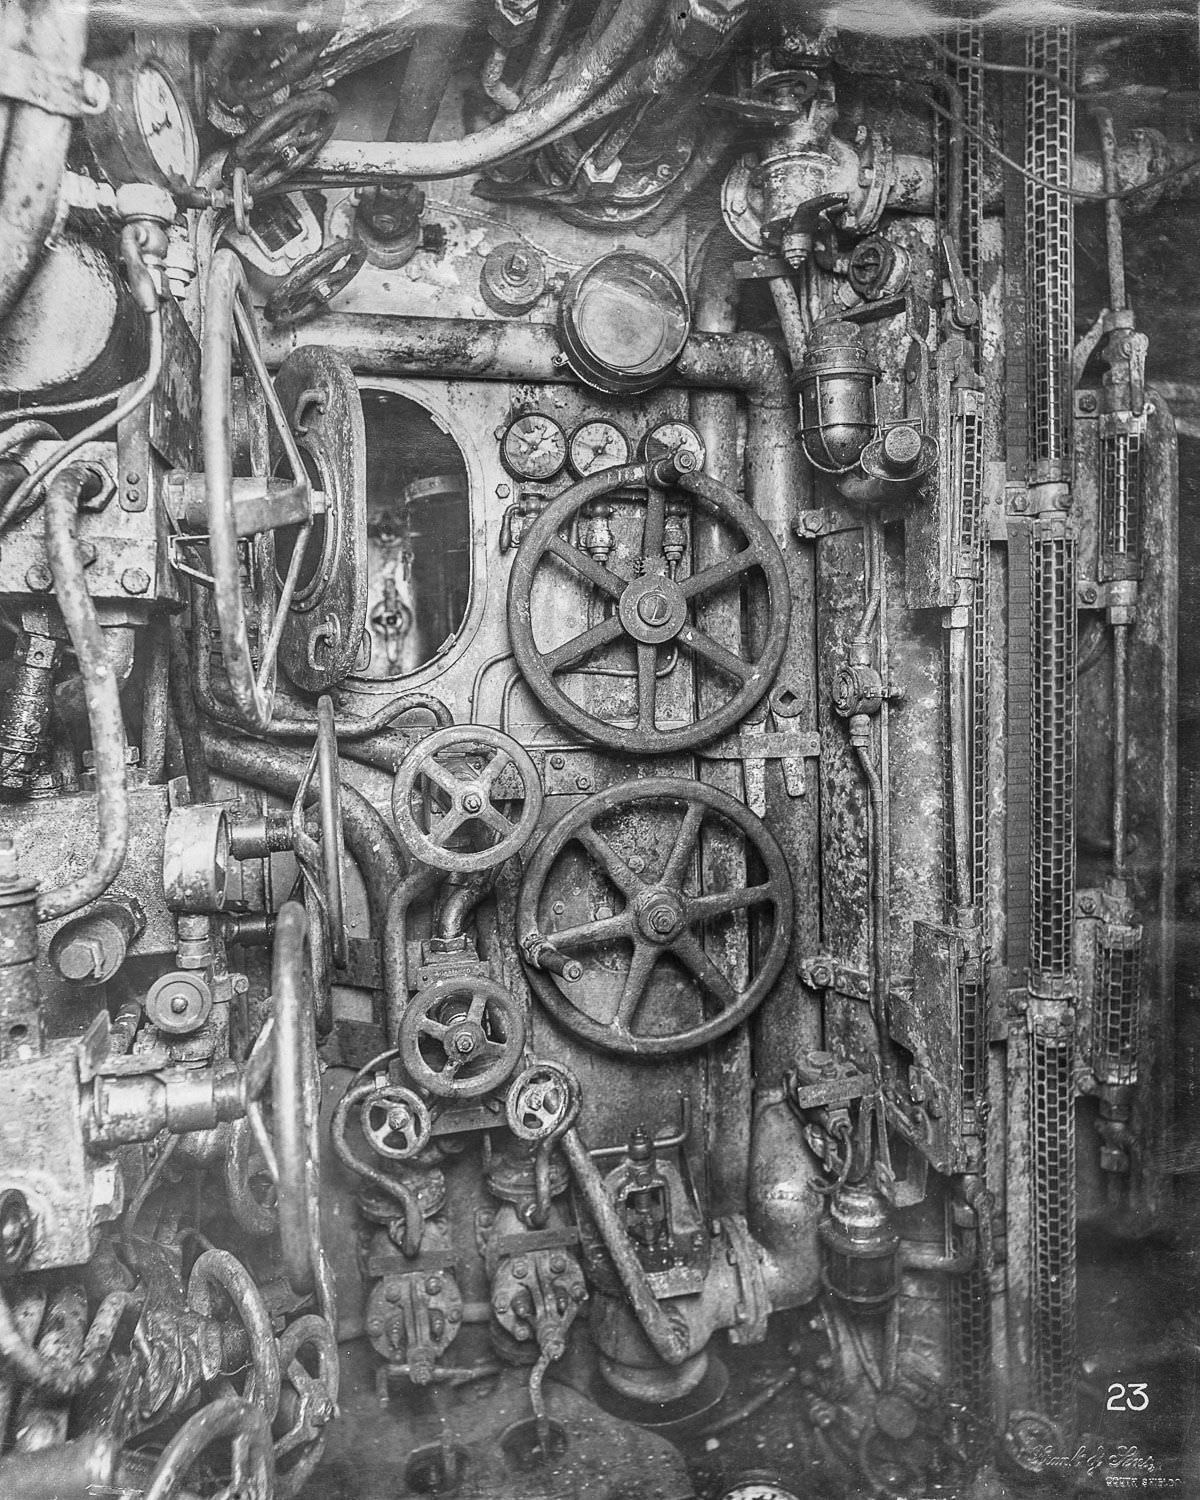 Control room looking aft. Wheels for raising and lowering the periscope are visible.